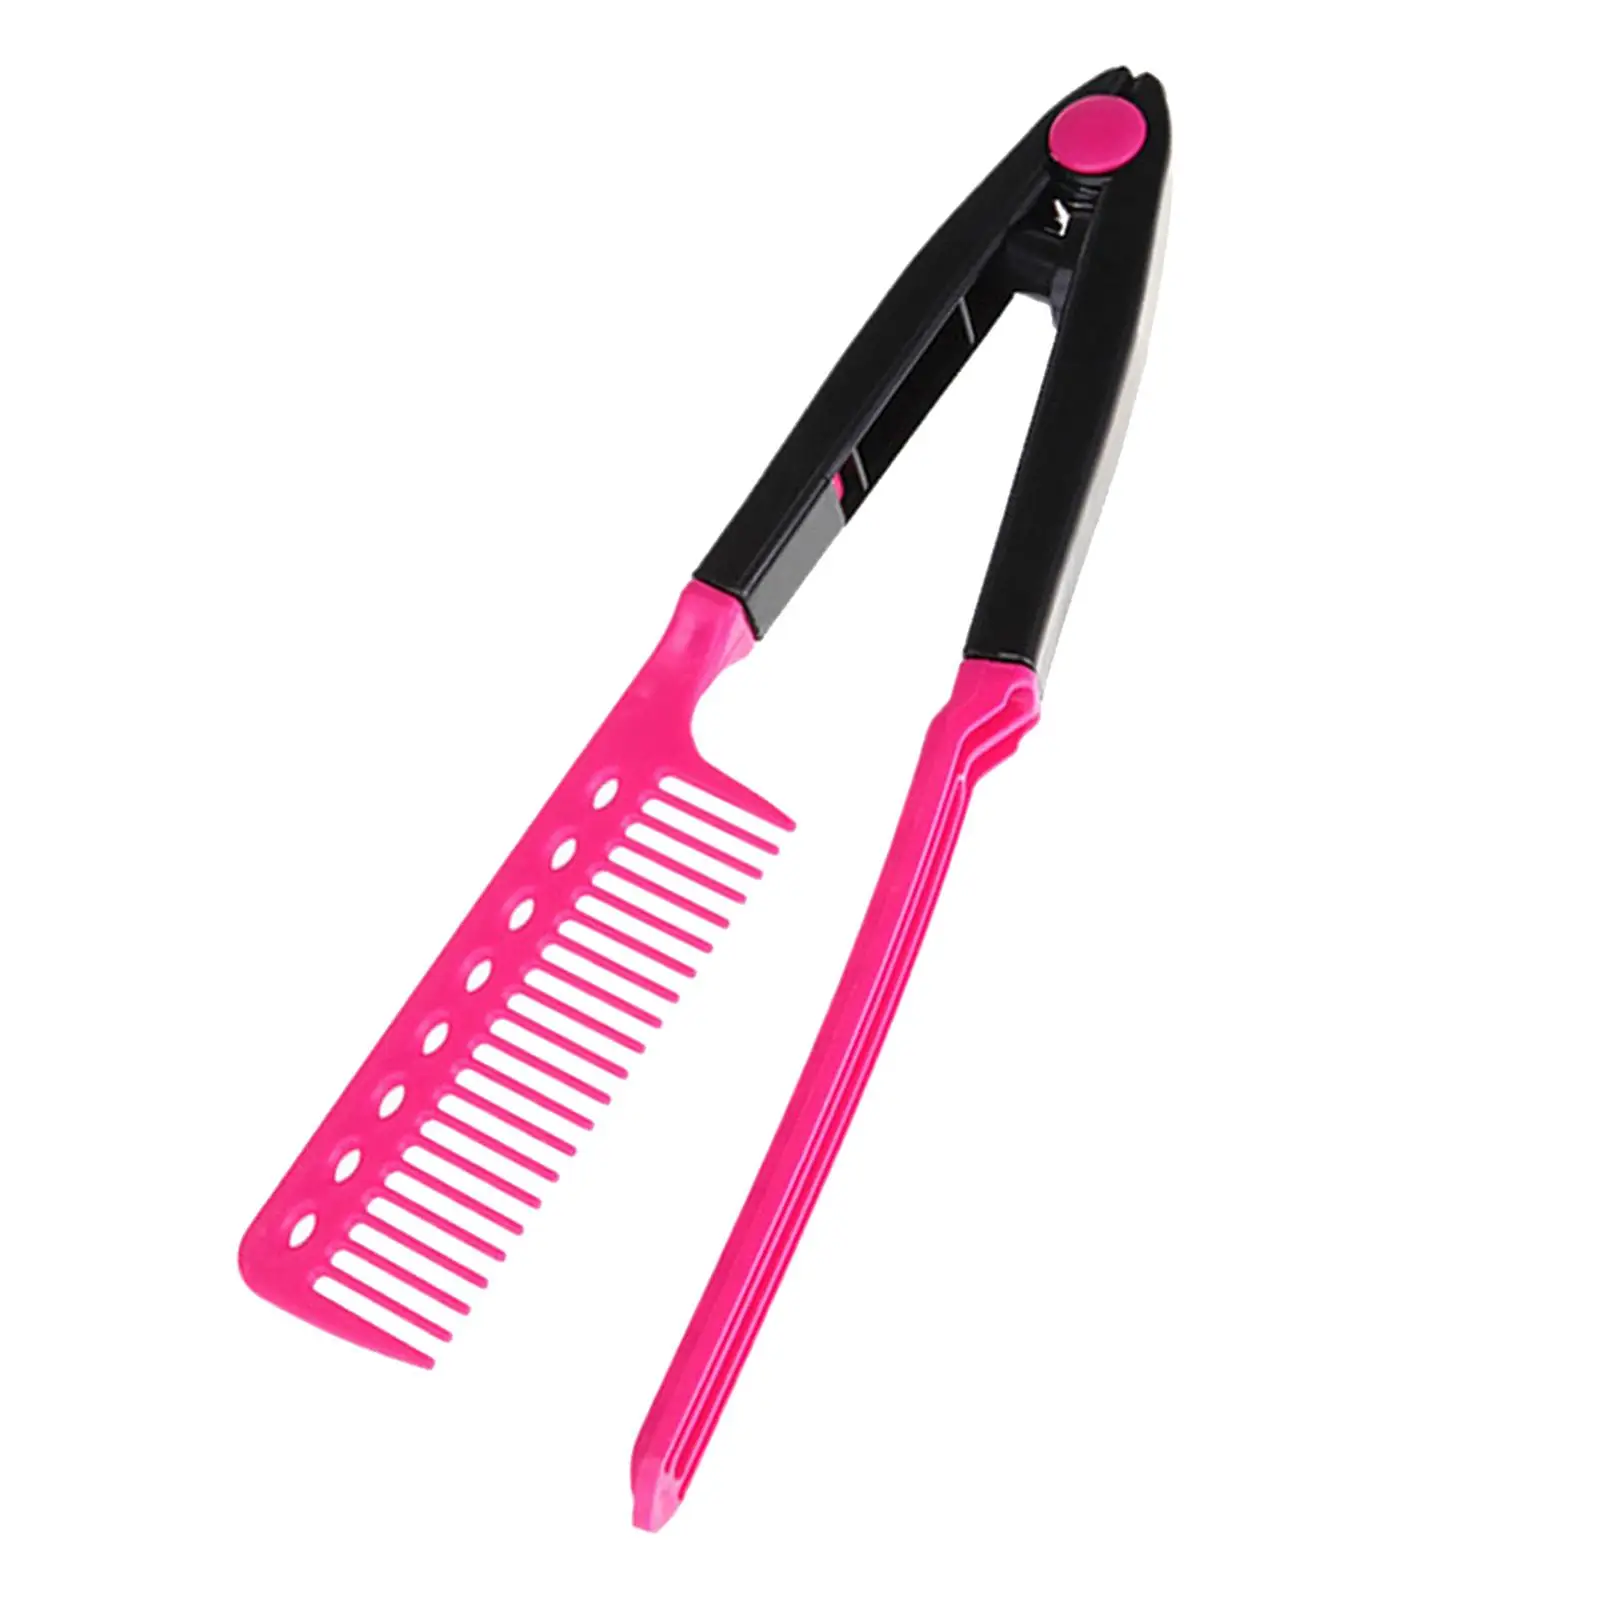 V Type Hair Straightening Comb Heat Resistance Straight Comb salon Portable Flat Iron Comb for Knotty Hair